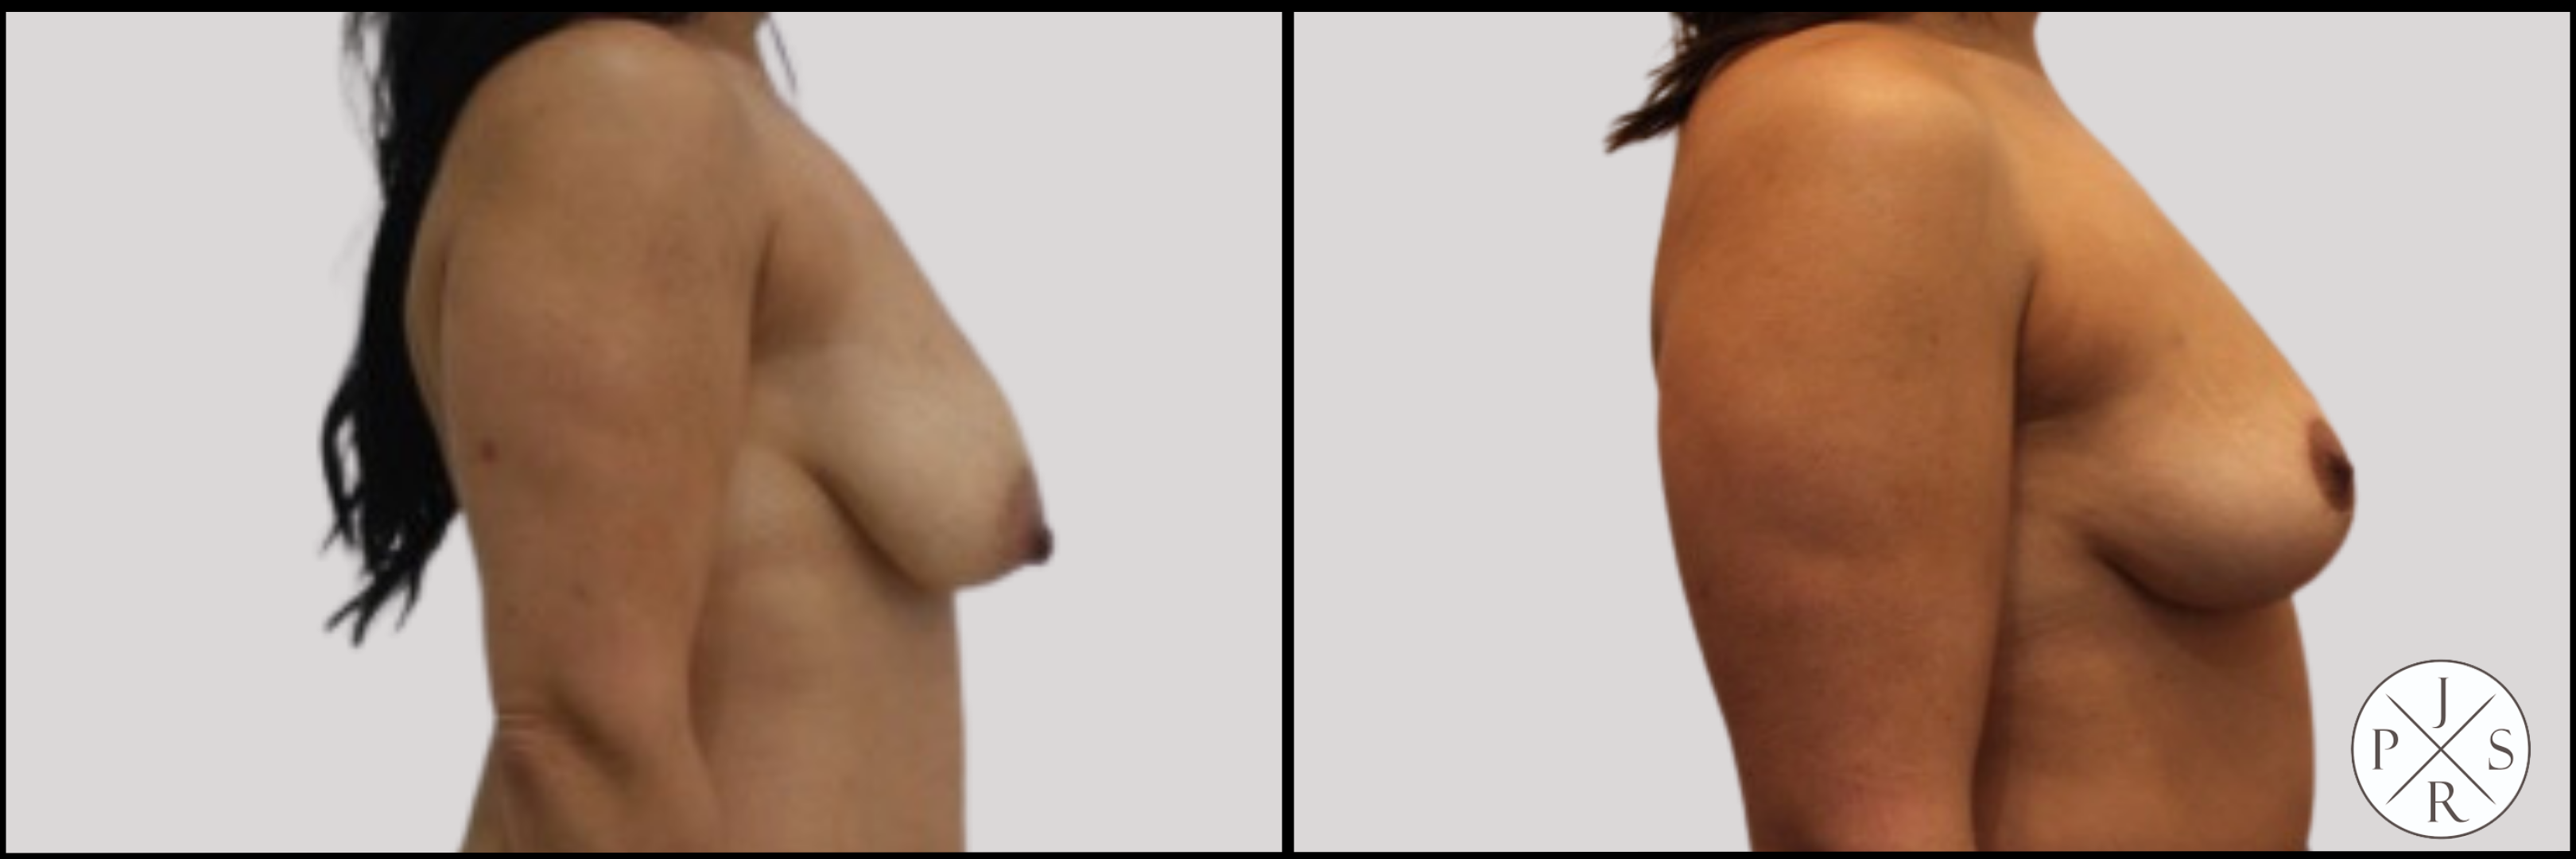 Fat Transfer Breast Augmentation Before & After Image